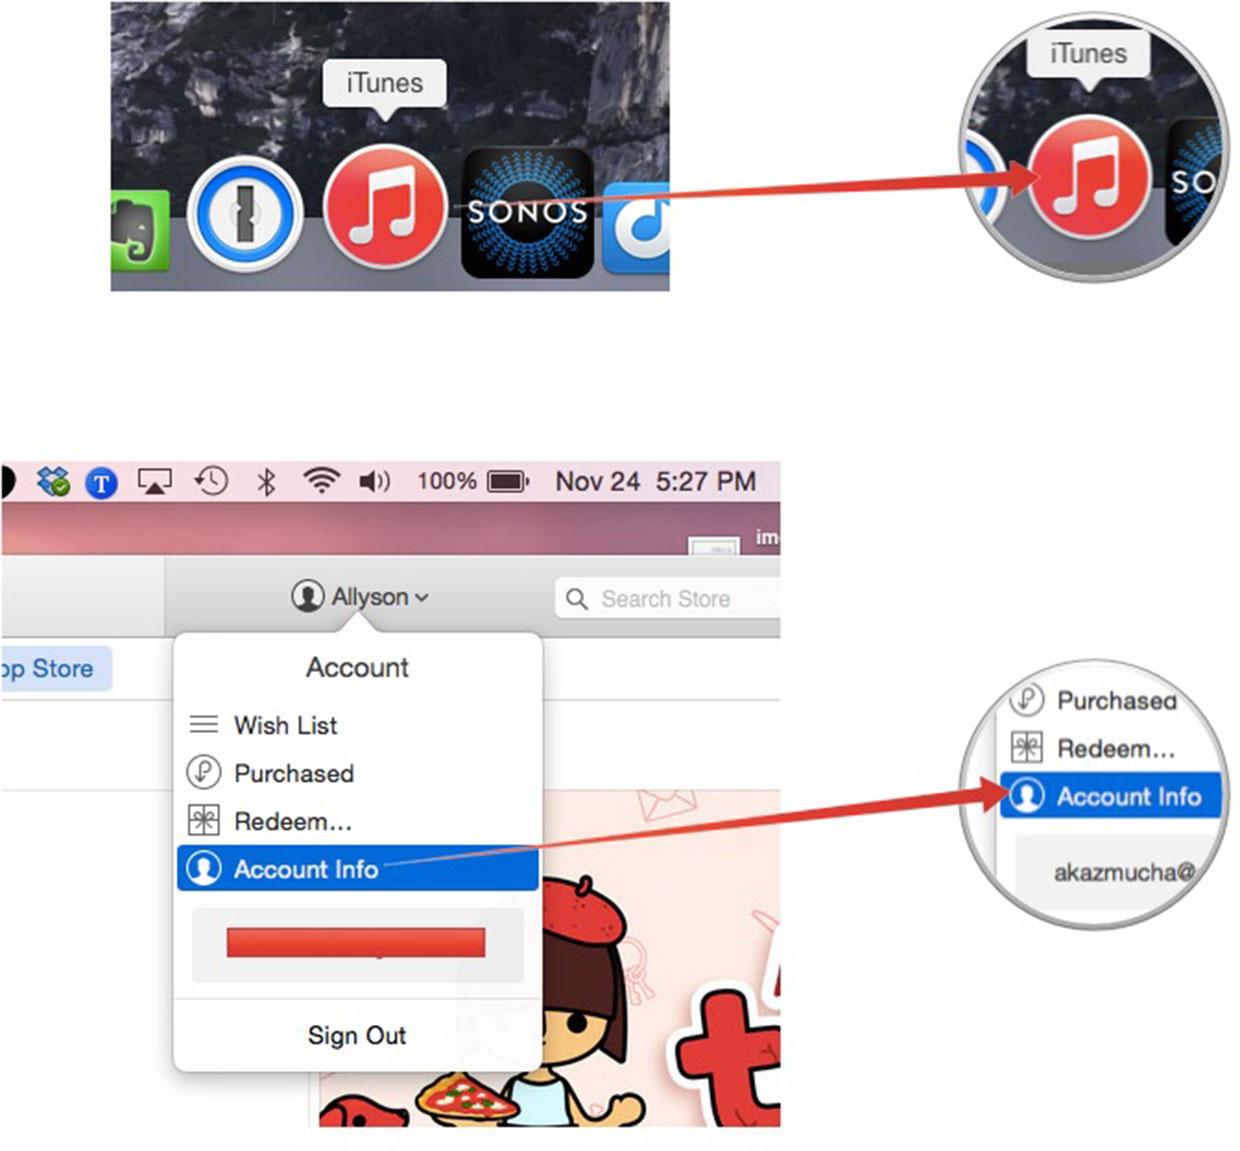 How to de-authorize devices linked to your iTunes account